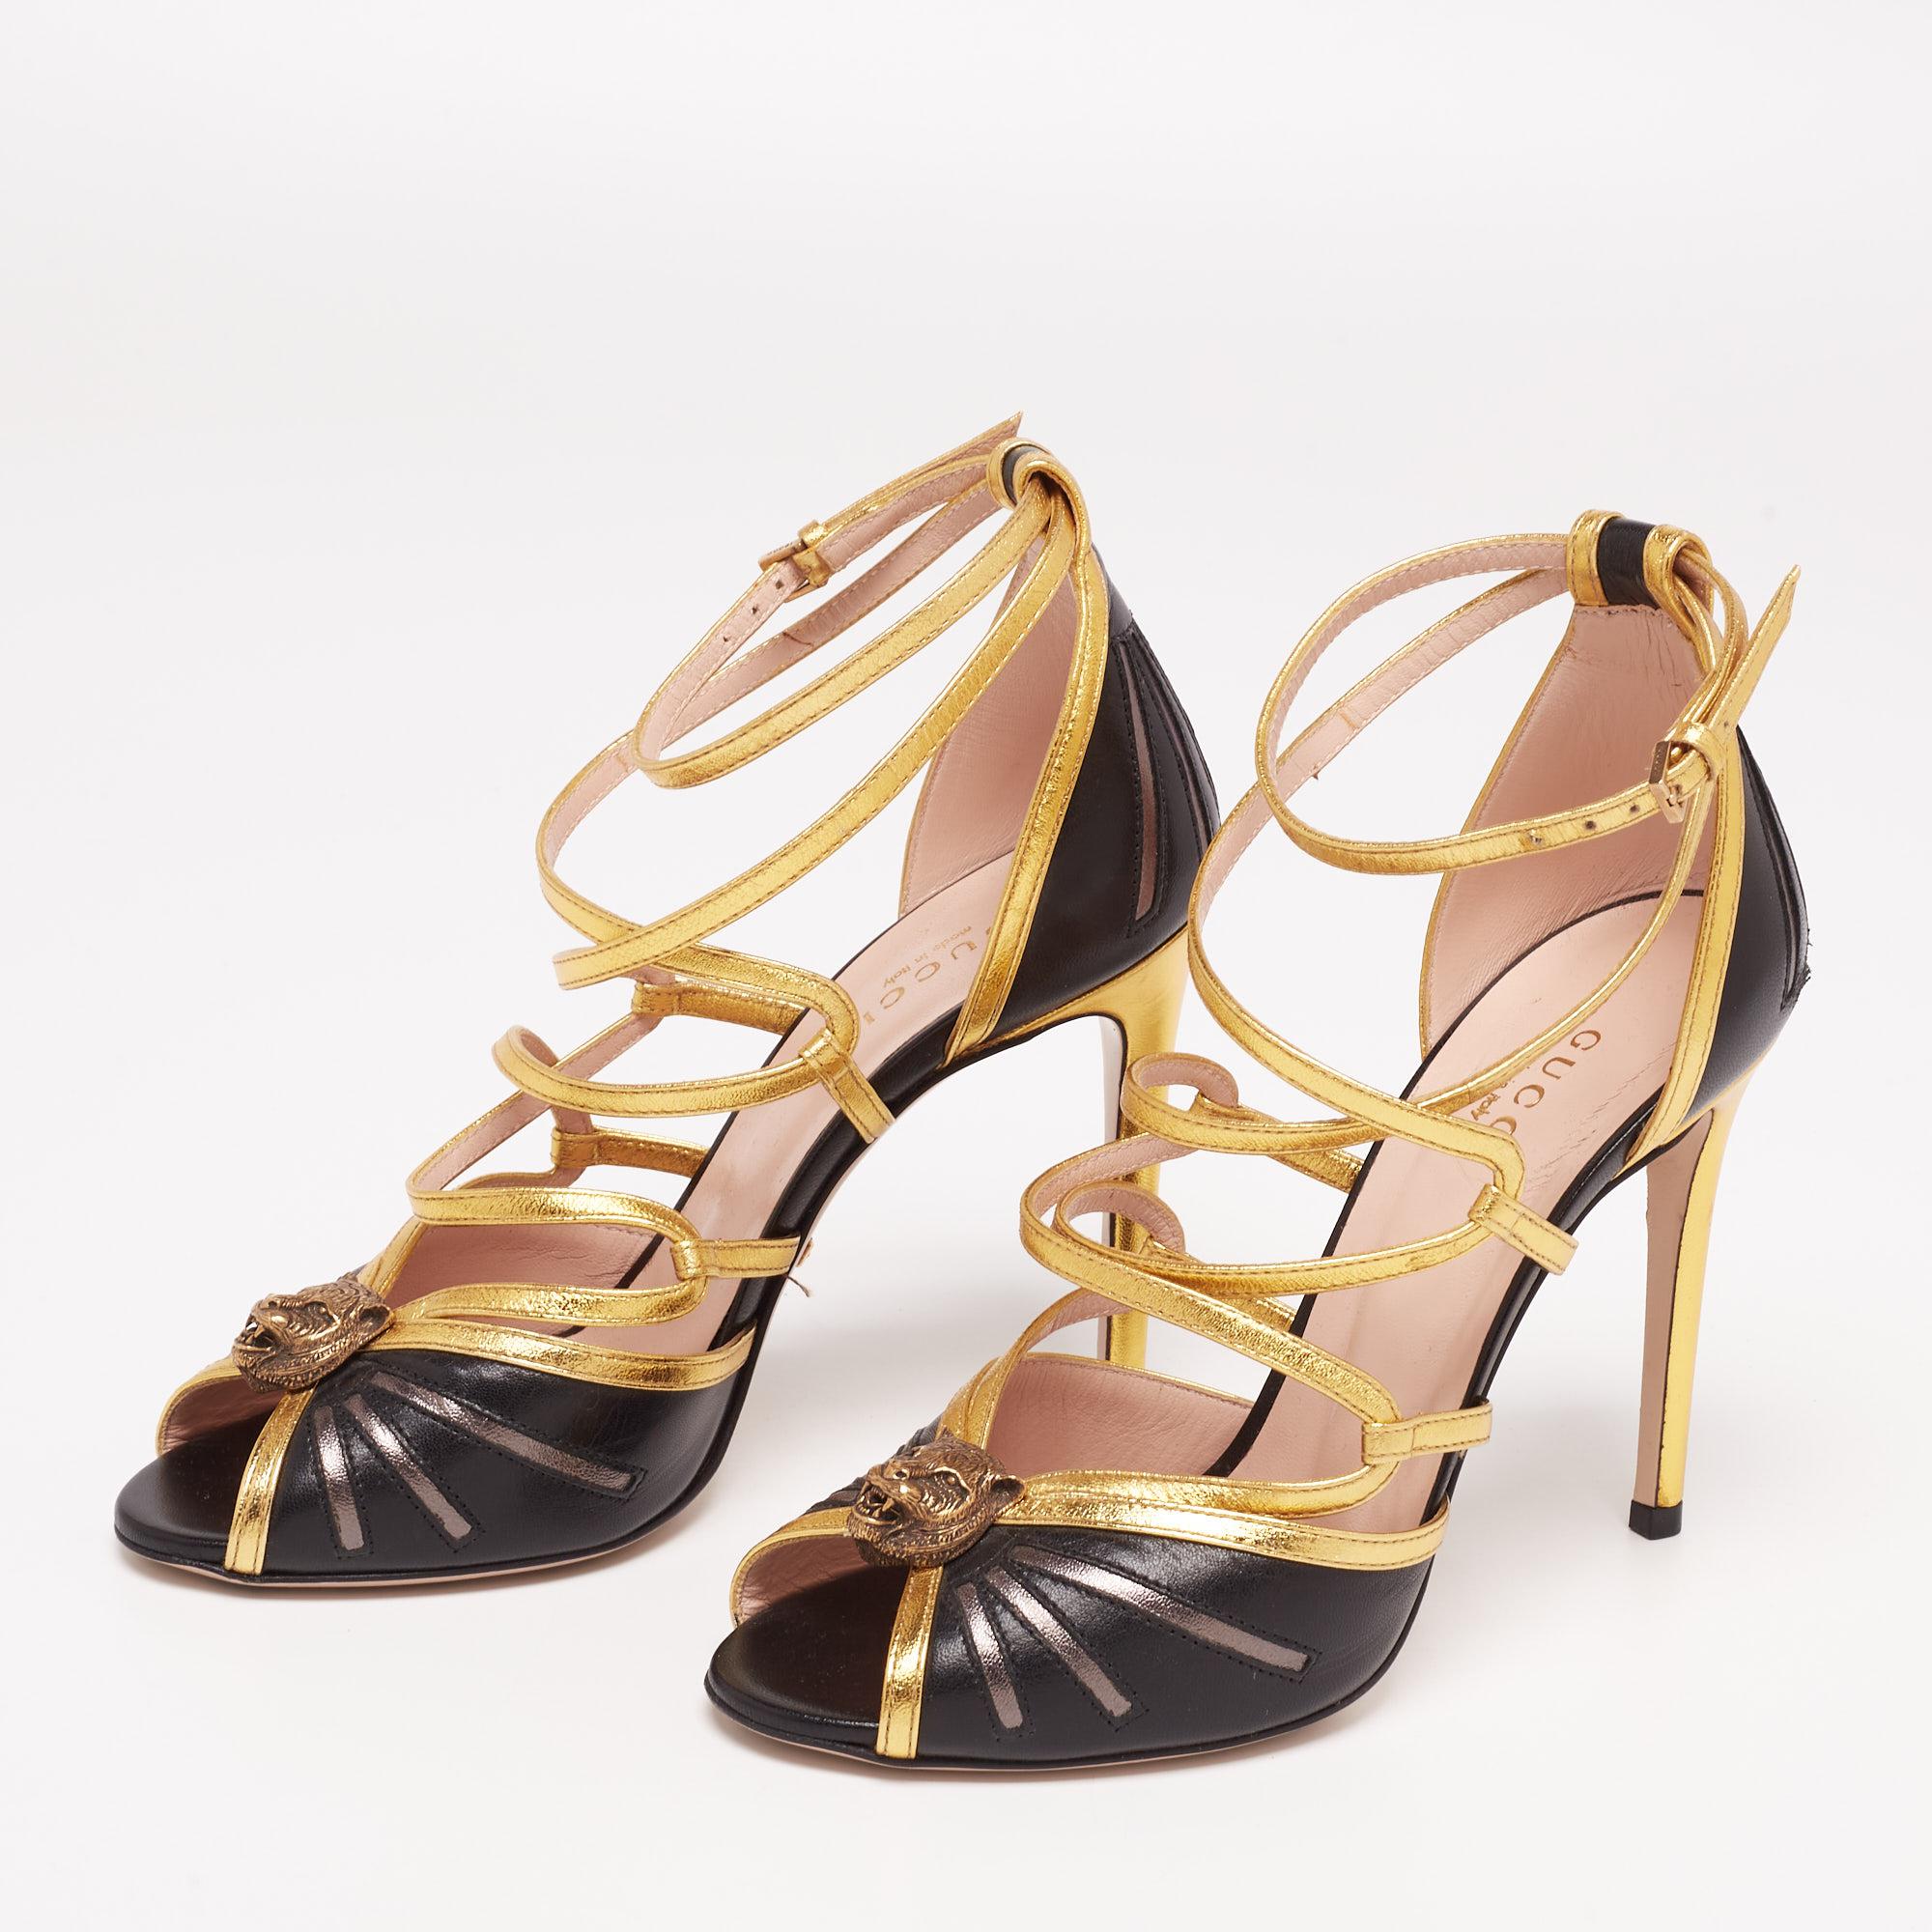 One of the most celebrated fashion House, Gucci is known for its brilliant craftsmanship in shoemaking. Crafted from quality materials in black and gold shades, the strappy style will adorn your feet in the most beautiful way. Style them with